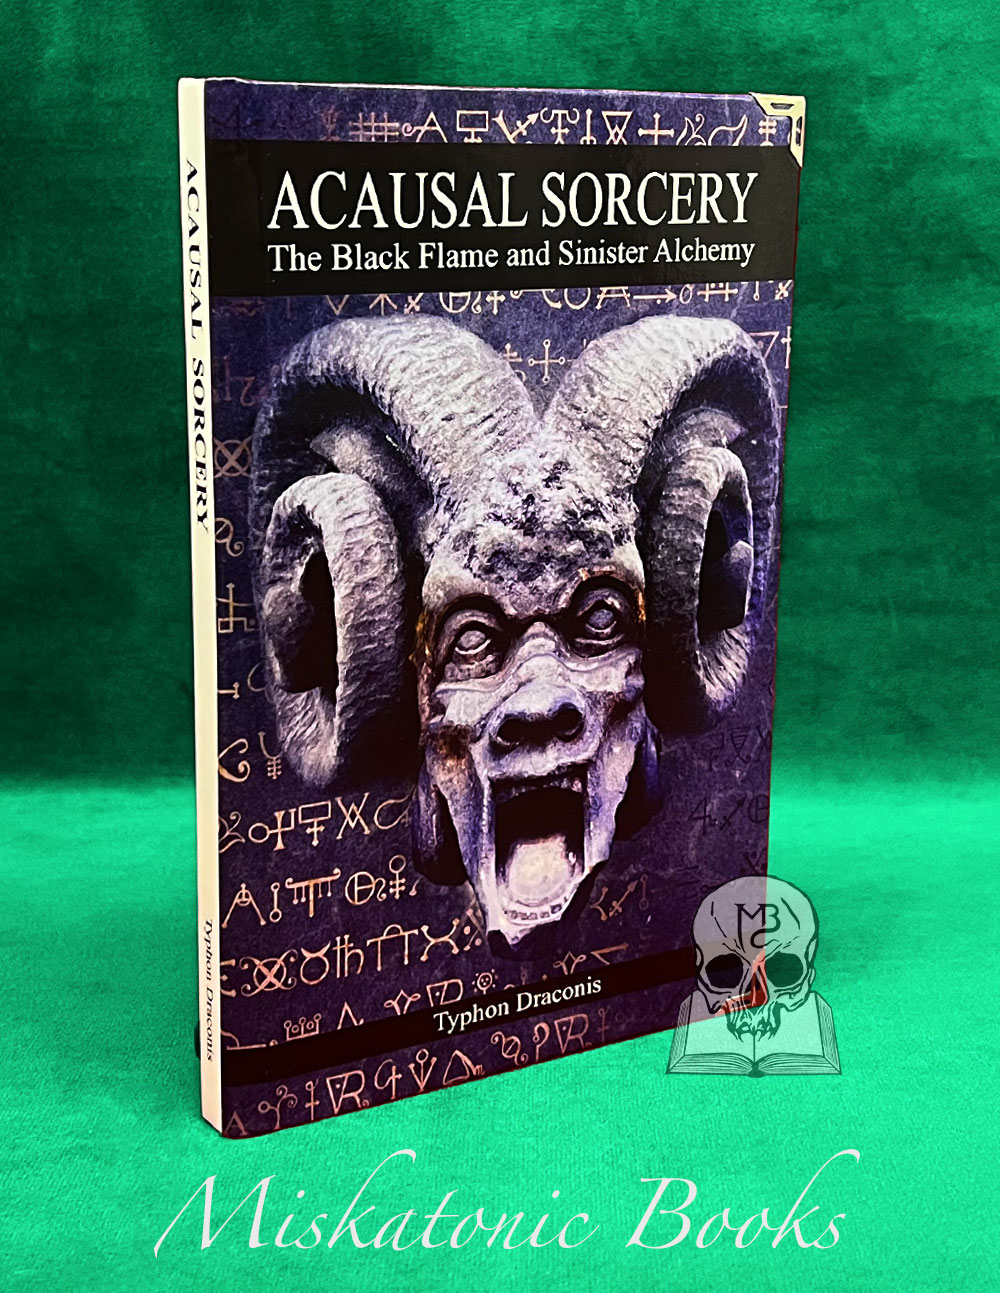 ACAUSAL SORCERY The Black Flame and Sinister Alchemy by Typhon Draconis - Limited Edition Hardcover with Altar Cloth